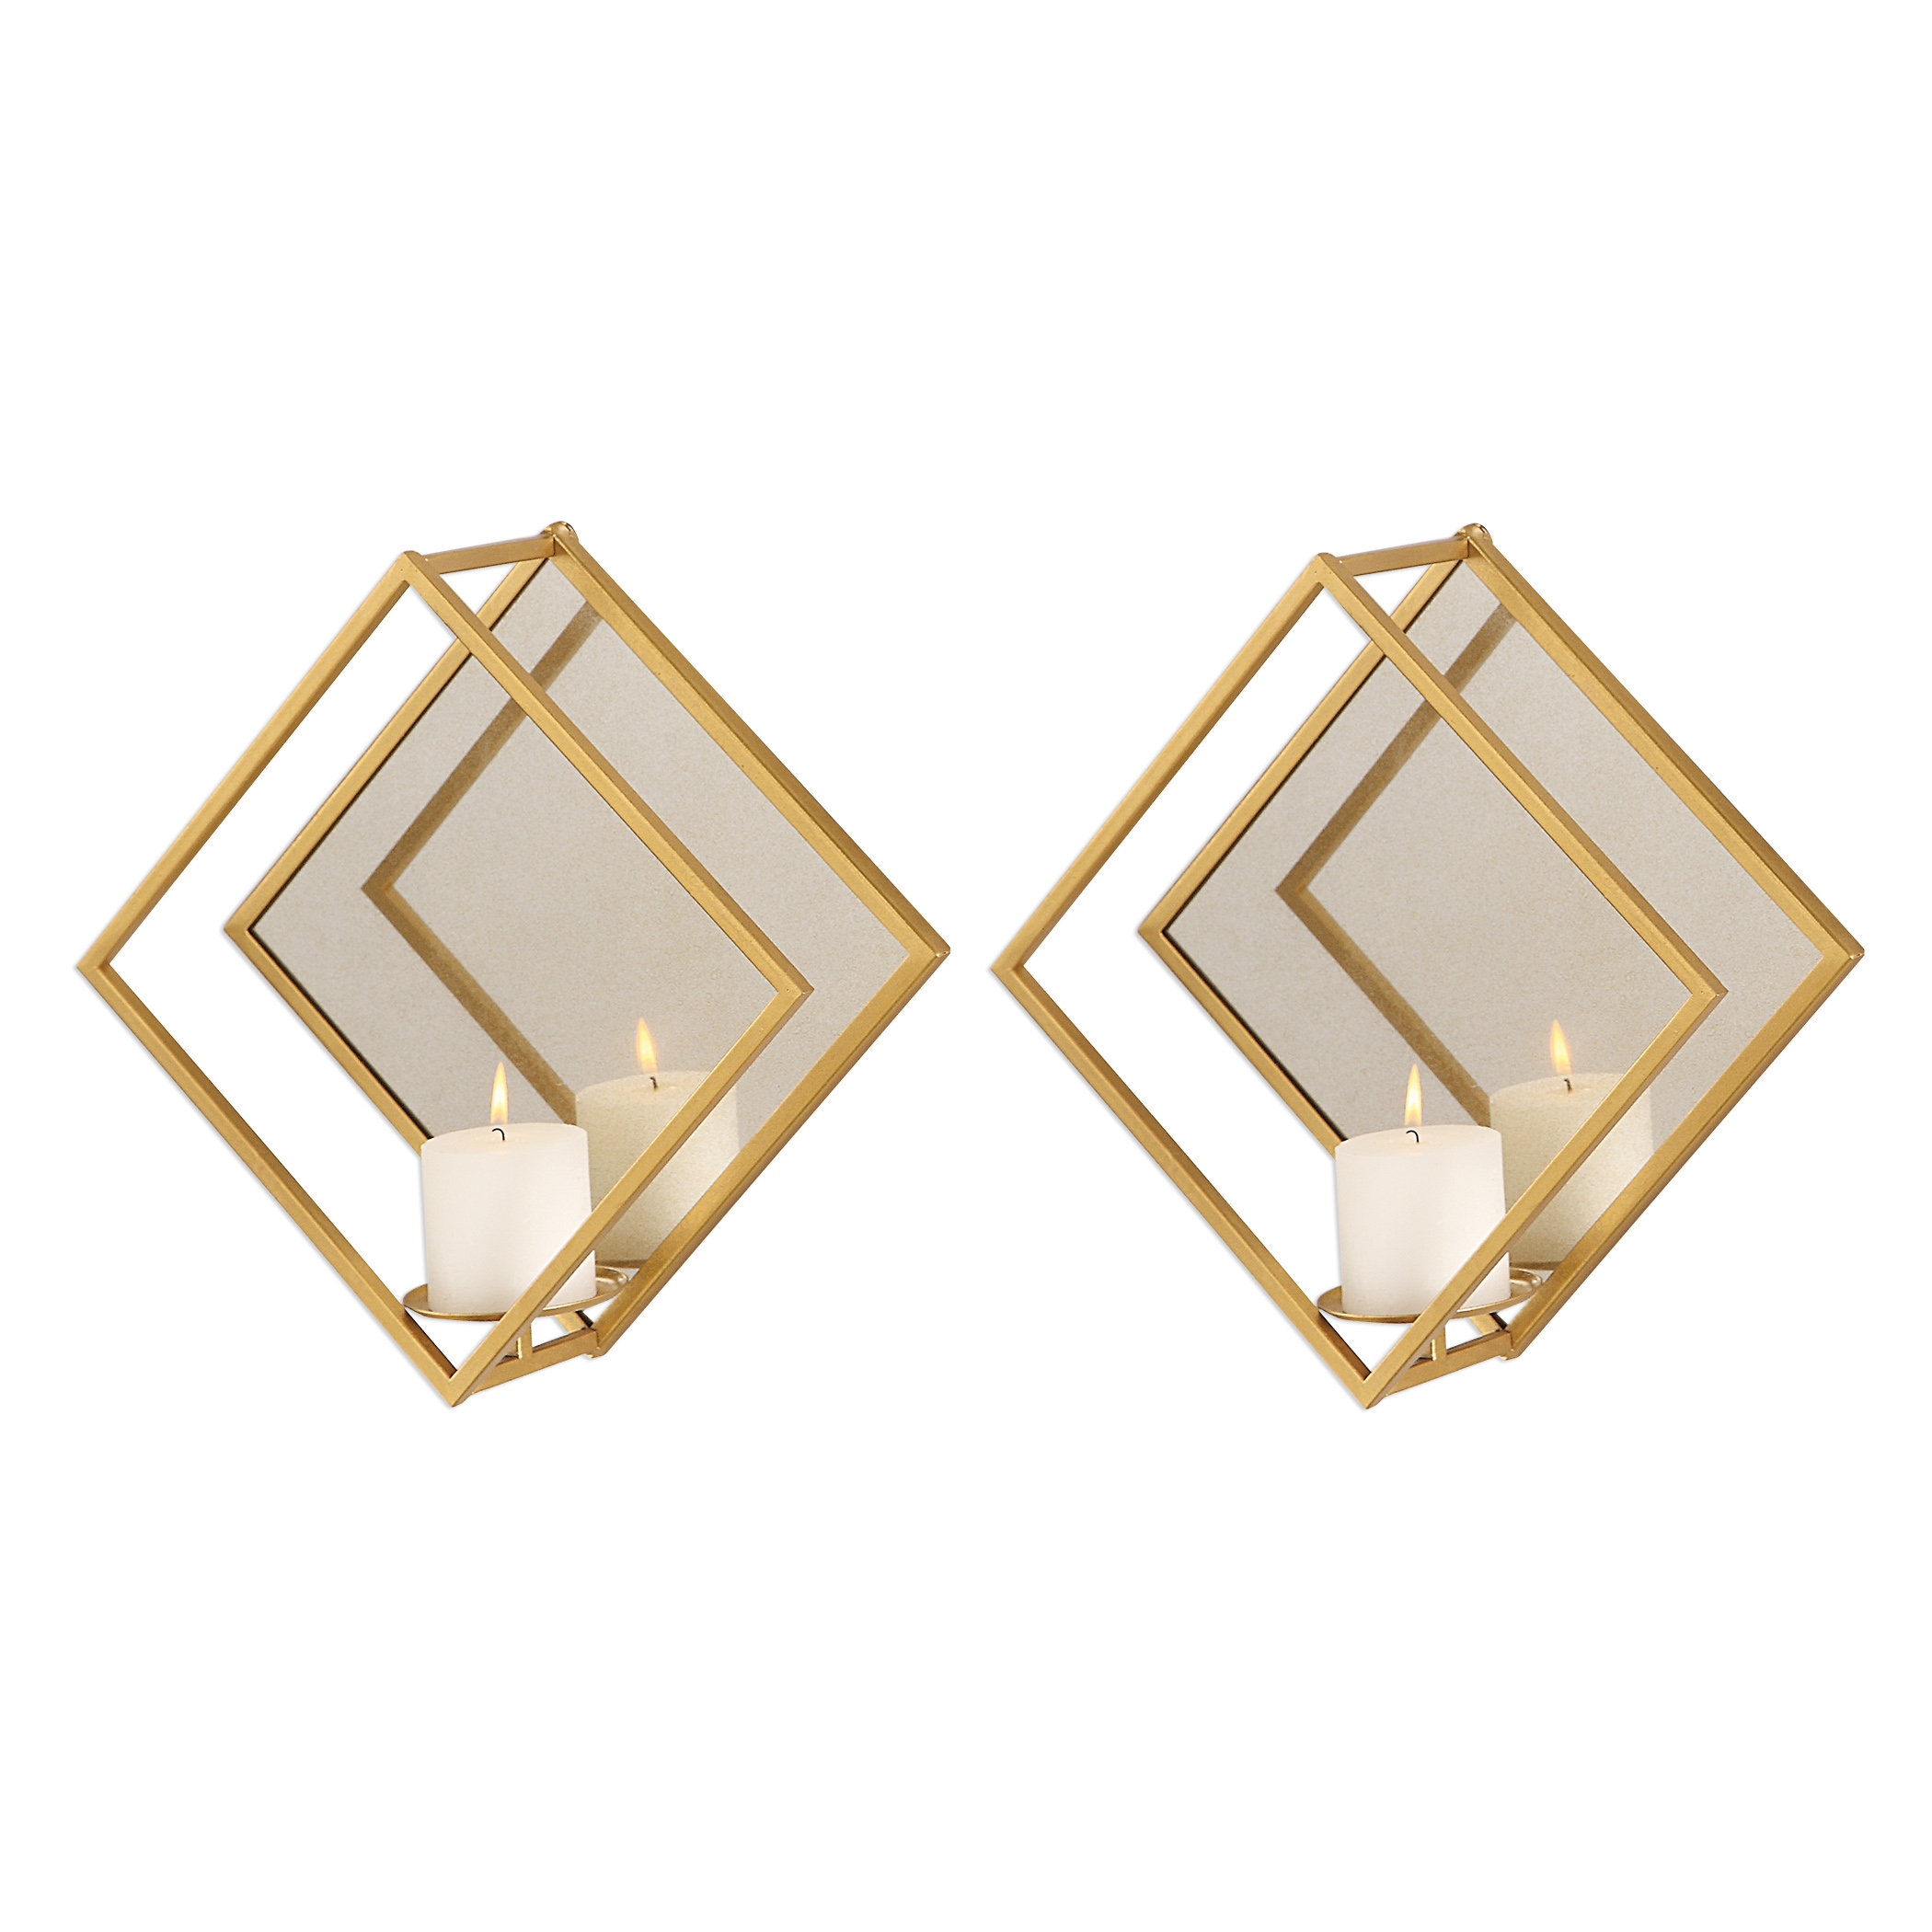 Zulia Gold Candle Sconces, S/2 - Image 3